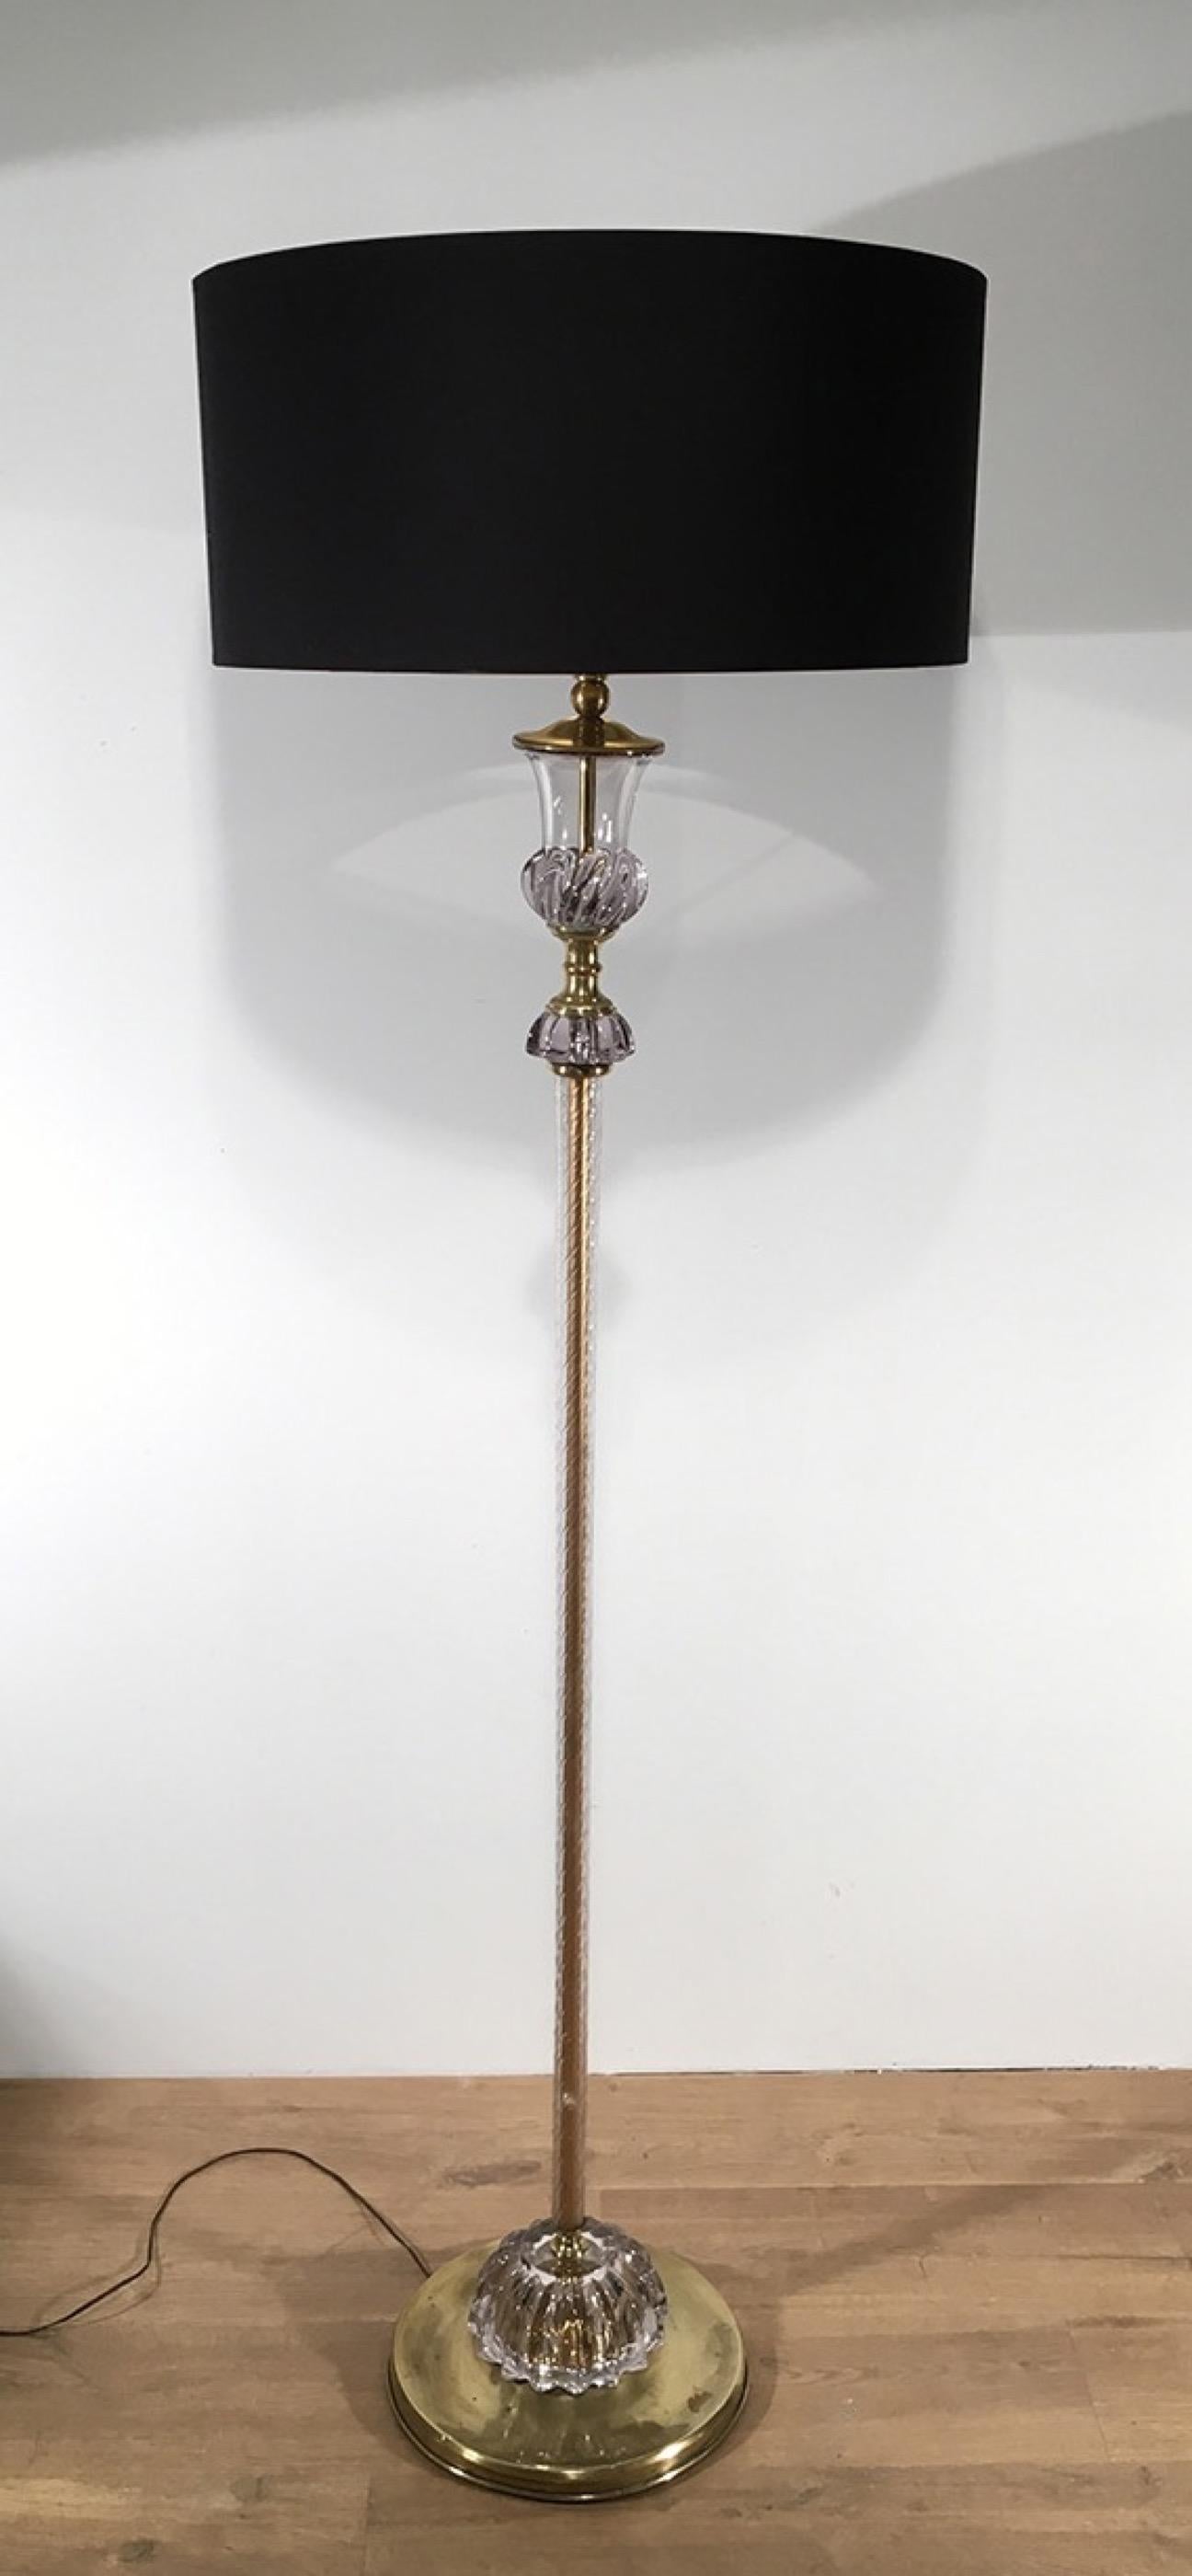 This very nice Murano floor lamp is made of glass. This is a beautiful model attributed to Barovier & Toso, Murano, Italy, circa 1940.
   